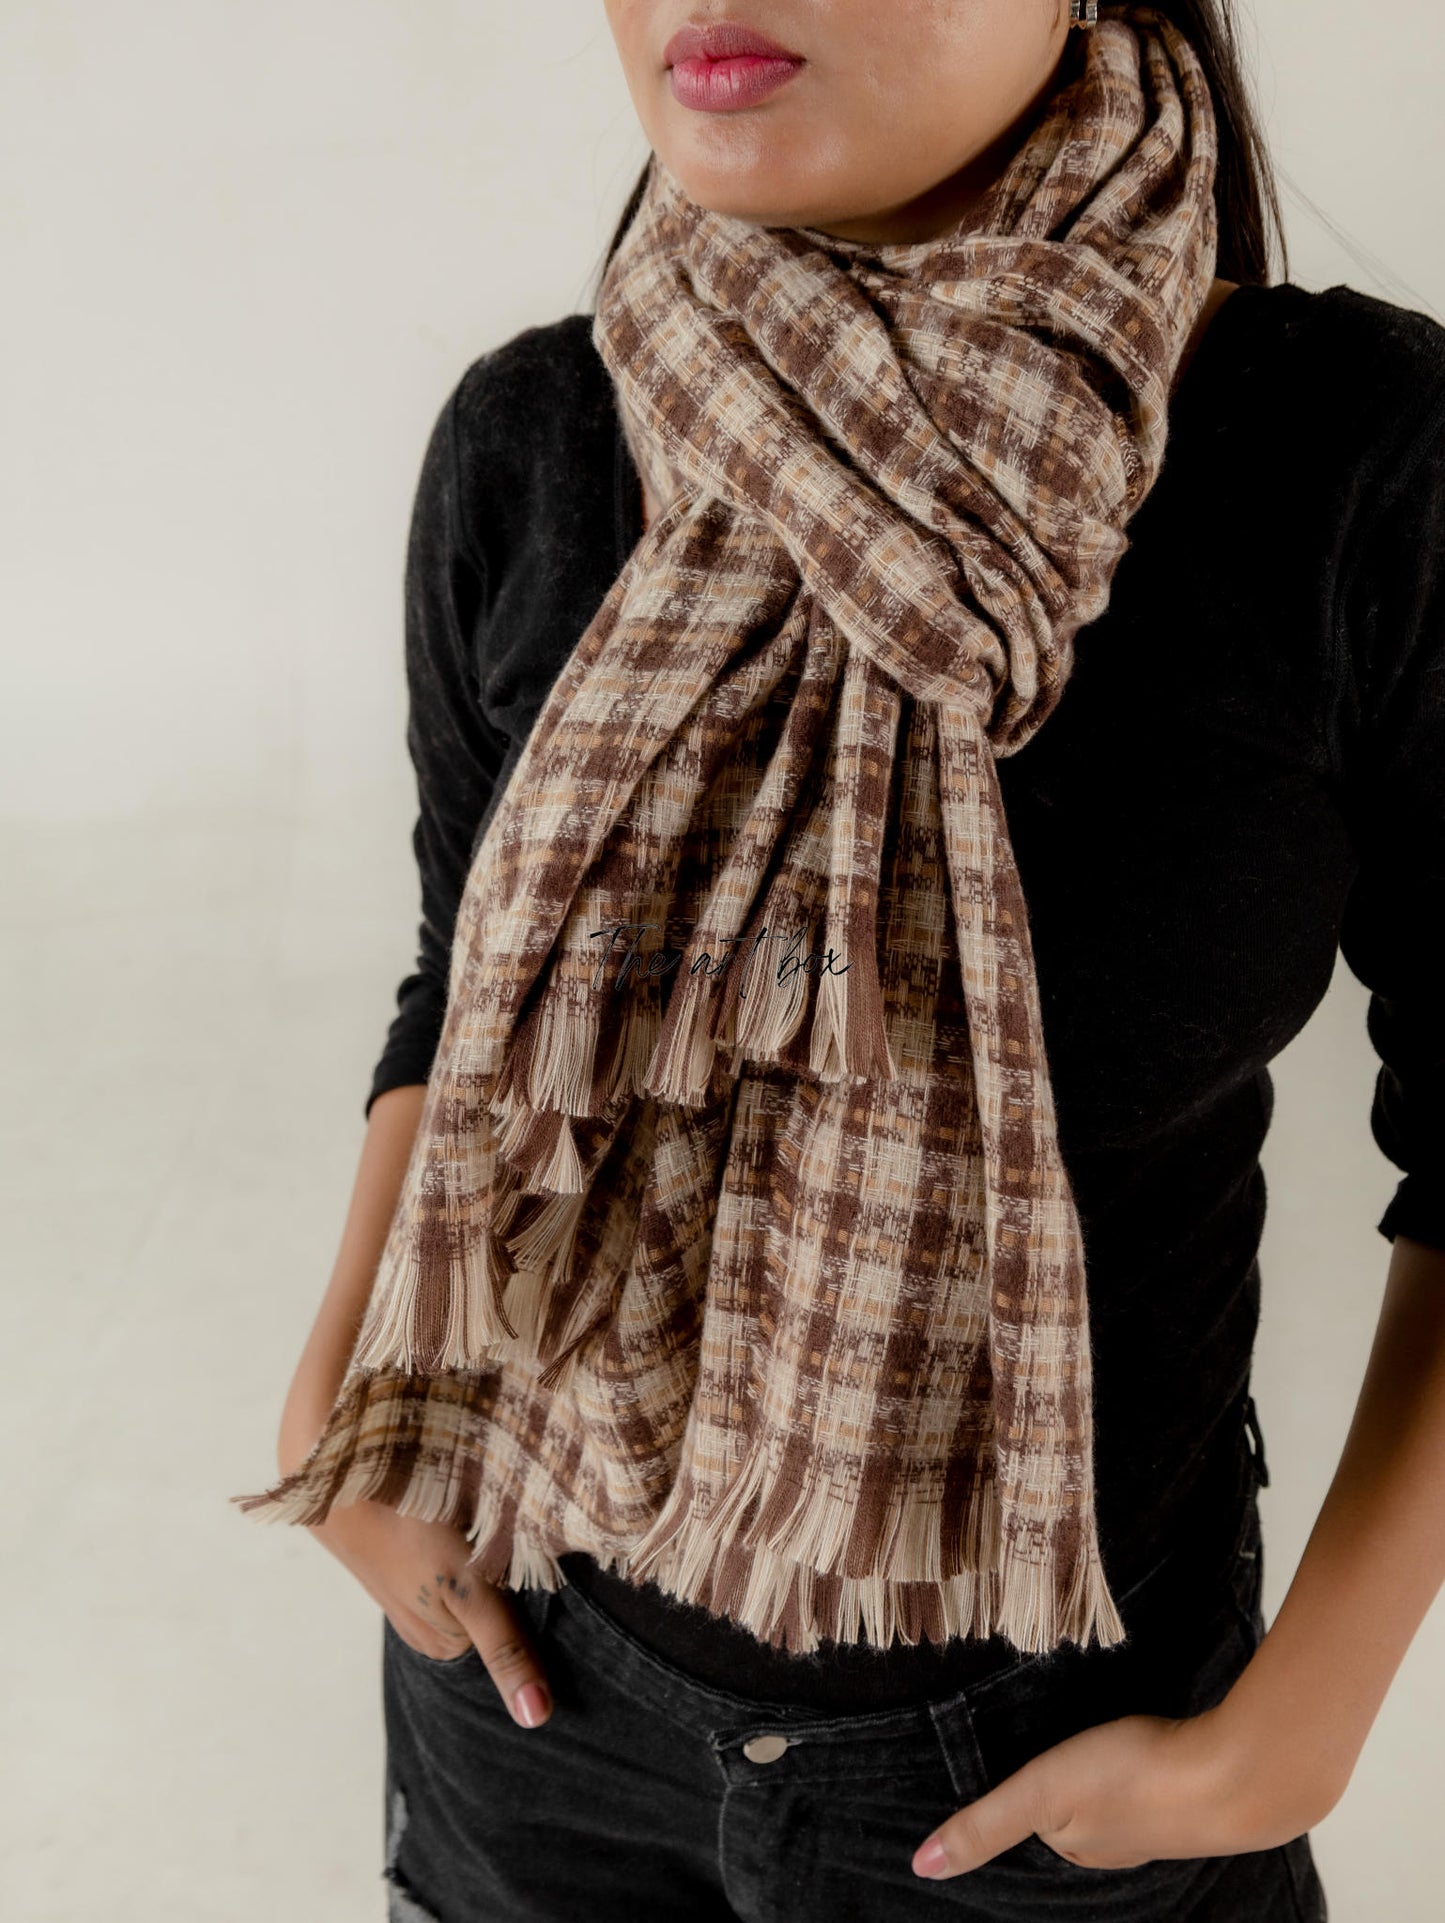 Cotton Woolen Scarves for Fashion-Forward Individuals